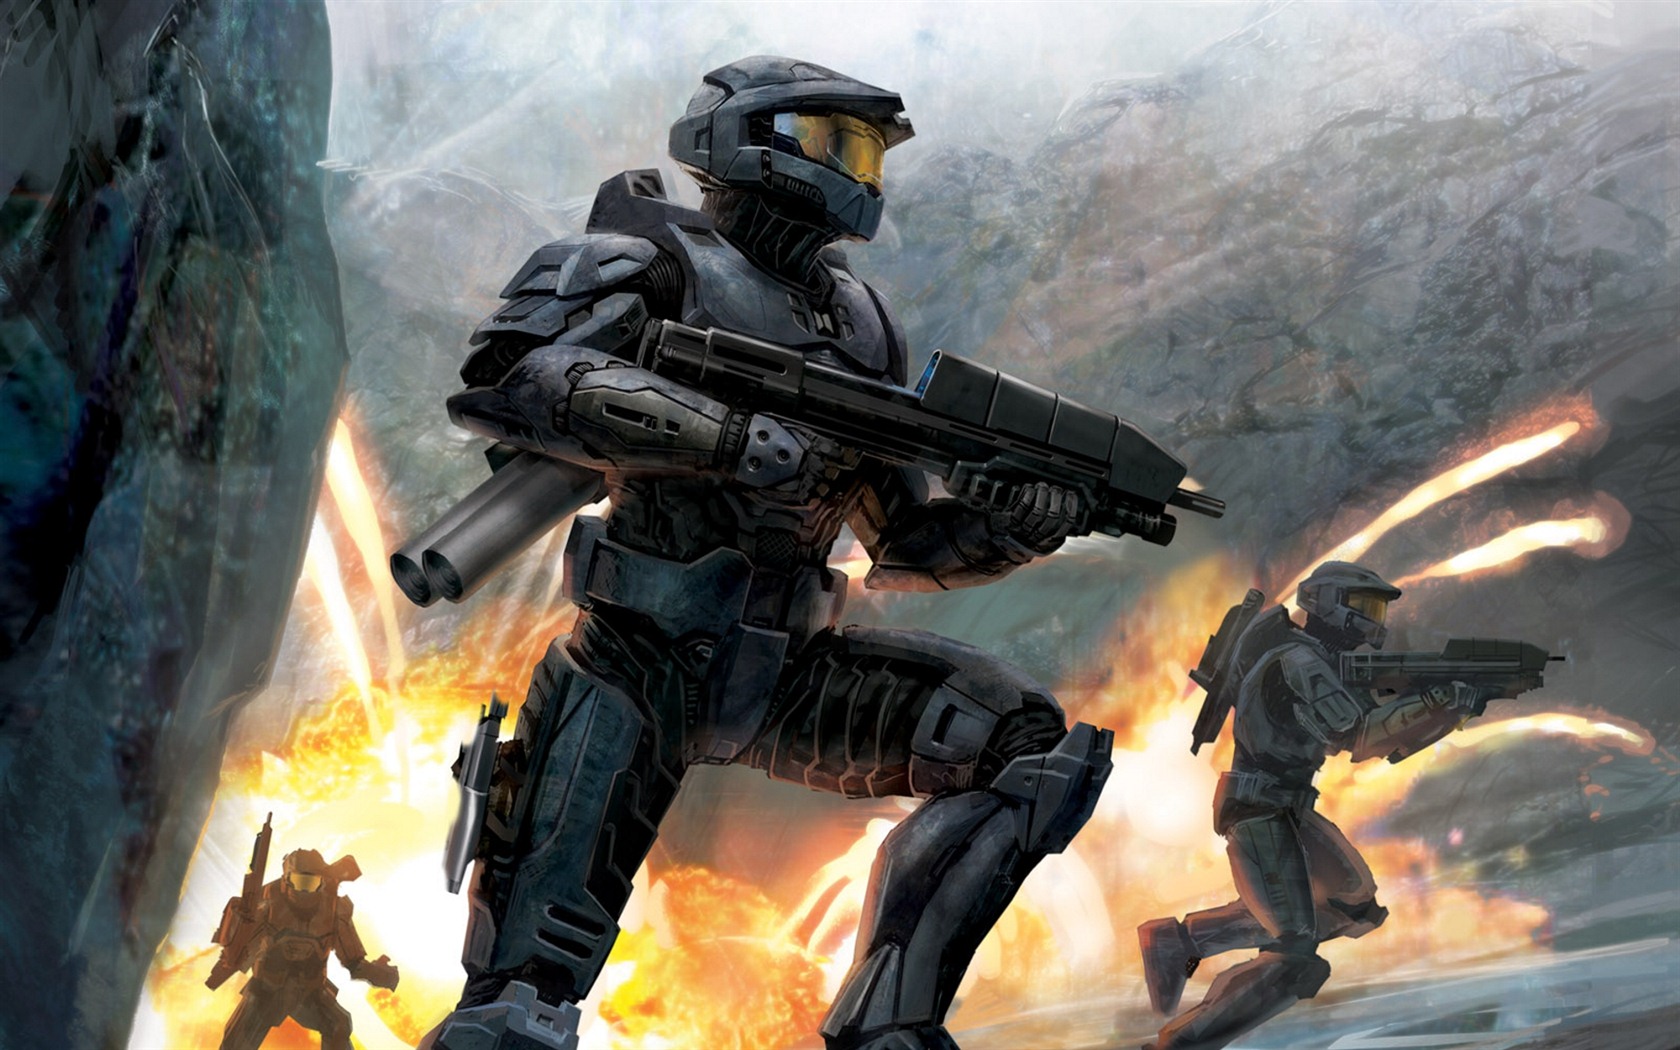 Halo game HD wallpapers #4 - 1680x1050